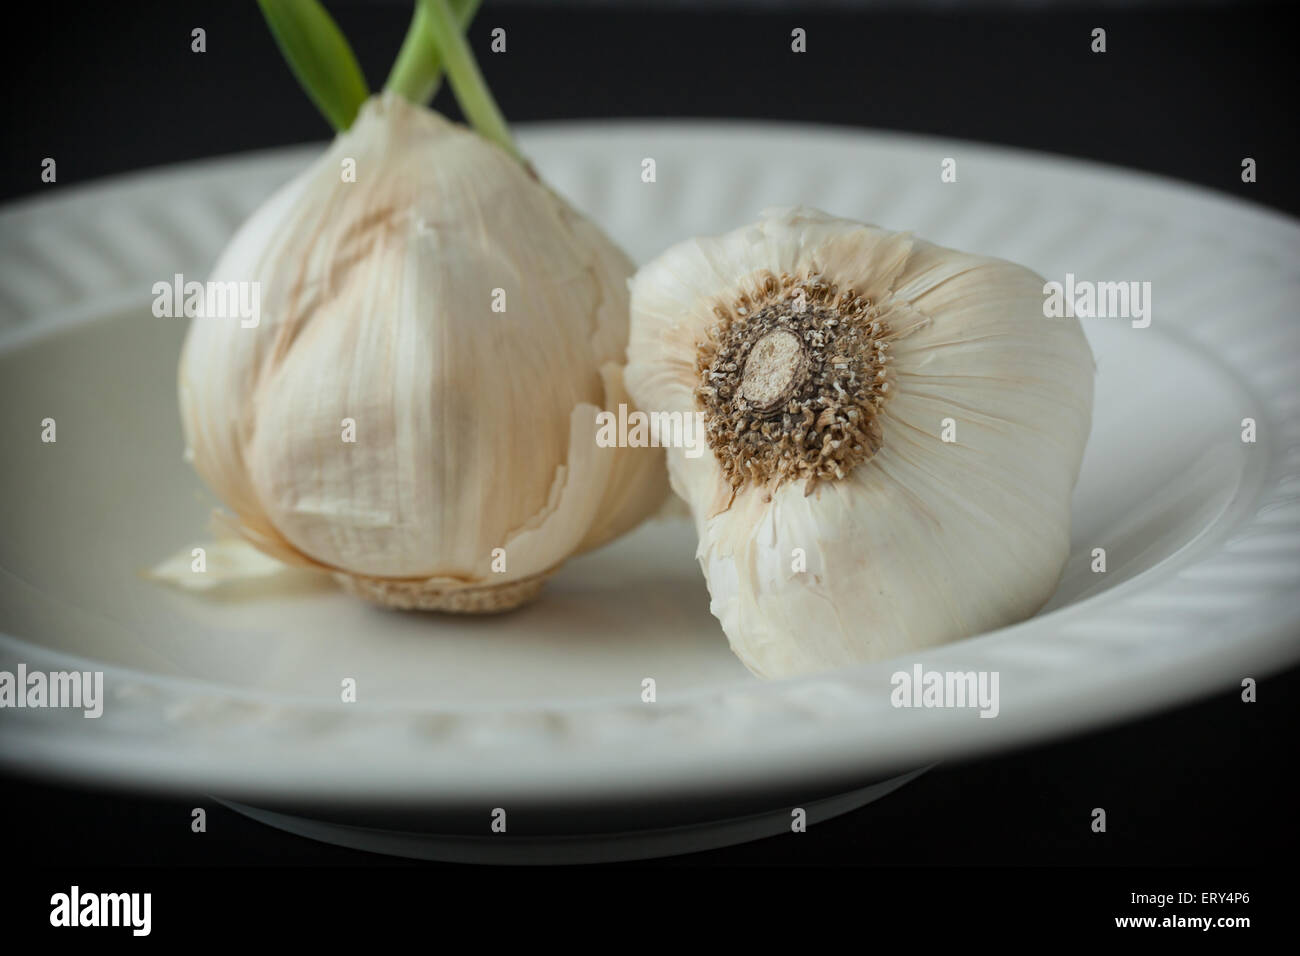 Two garlic bulbs, one sprouted, sit on a white plate on a black background. Stock Photo